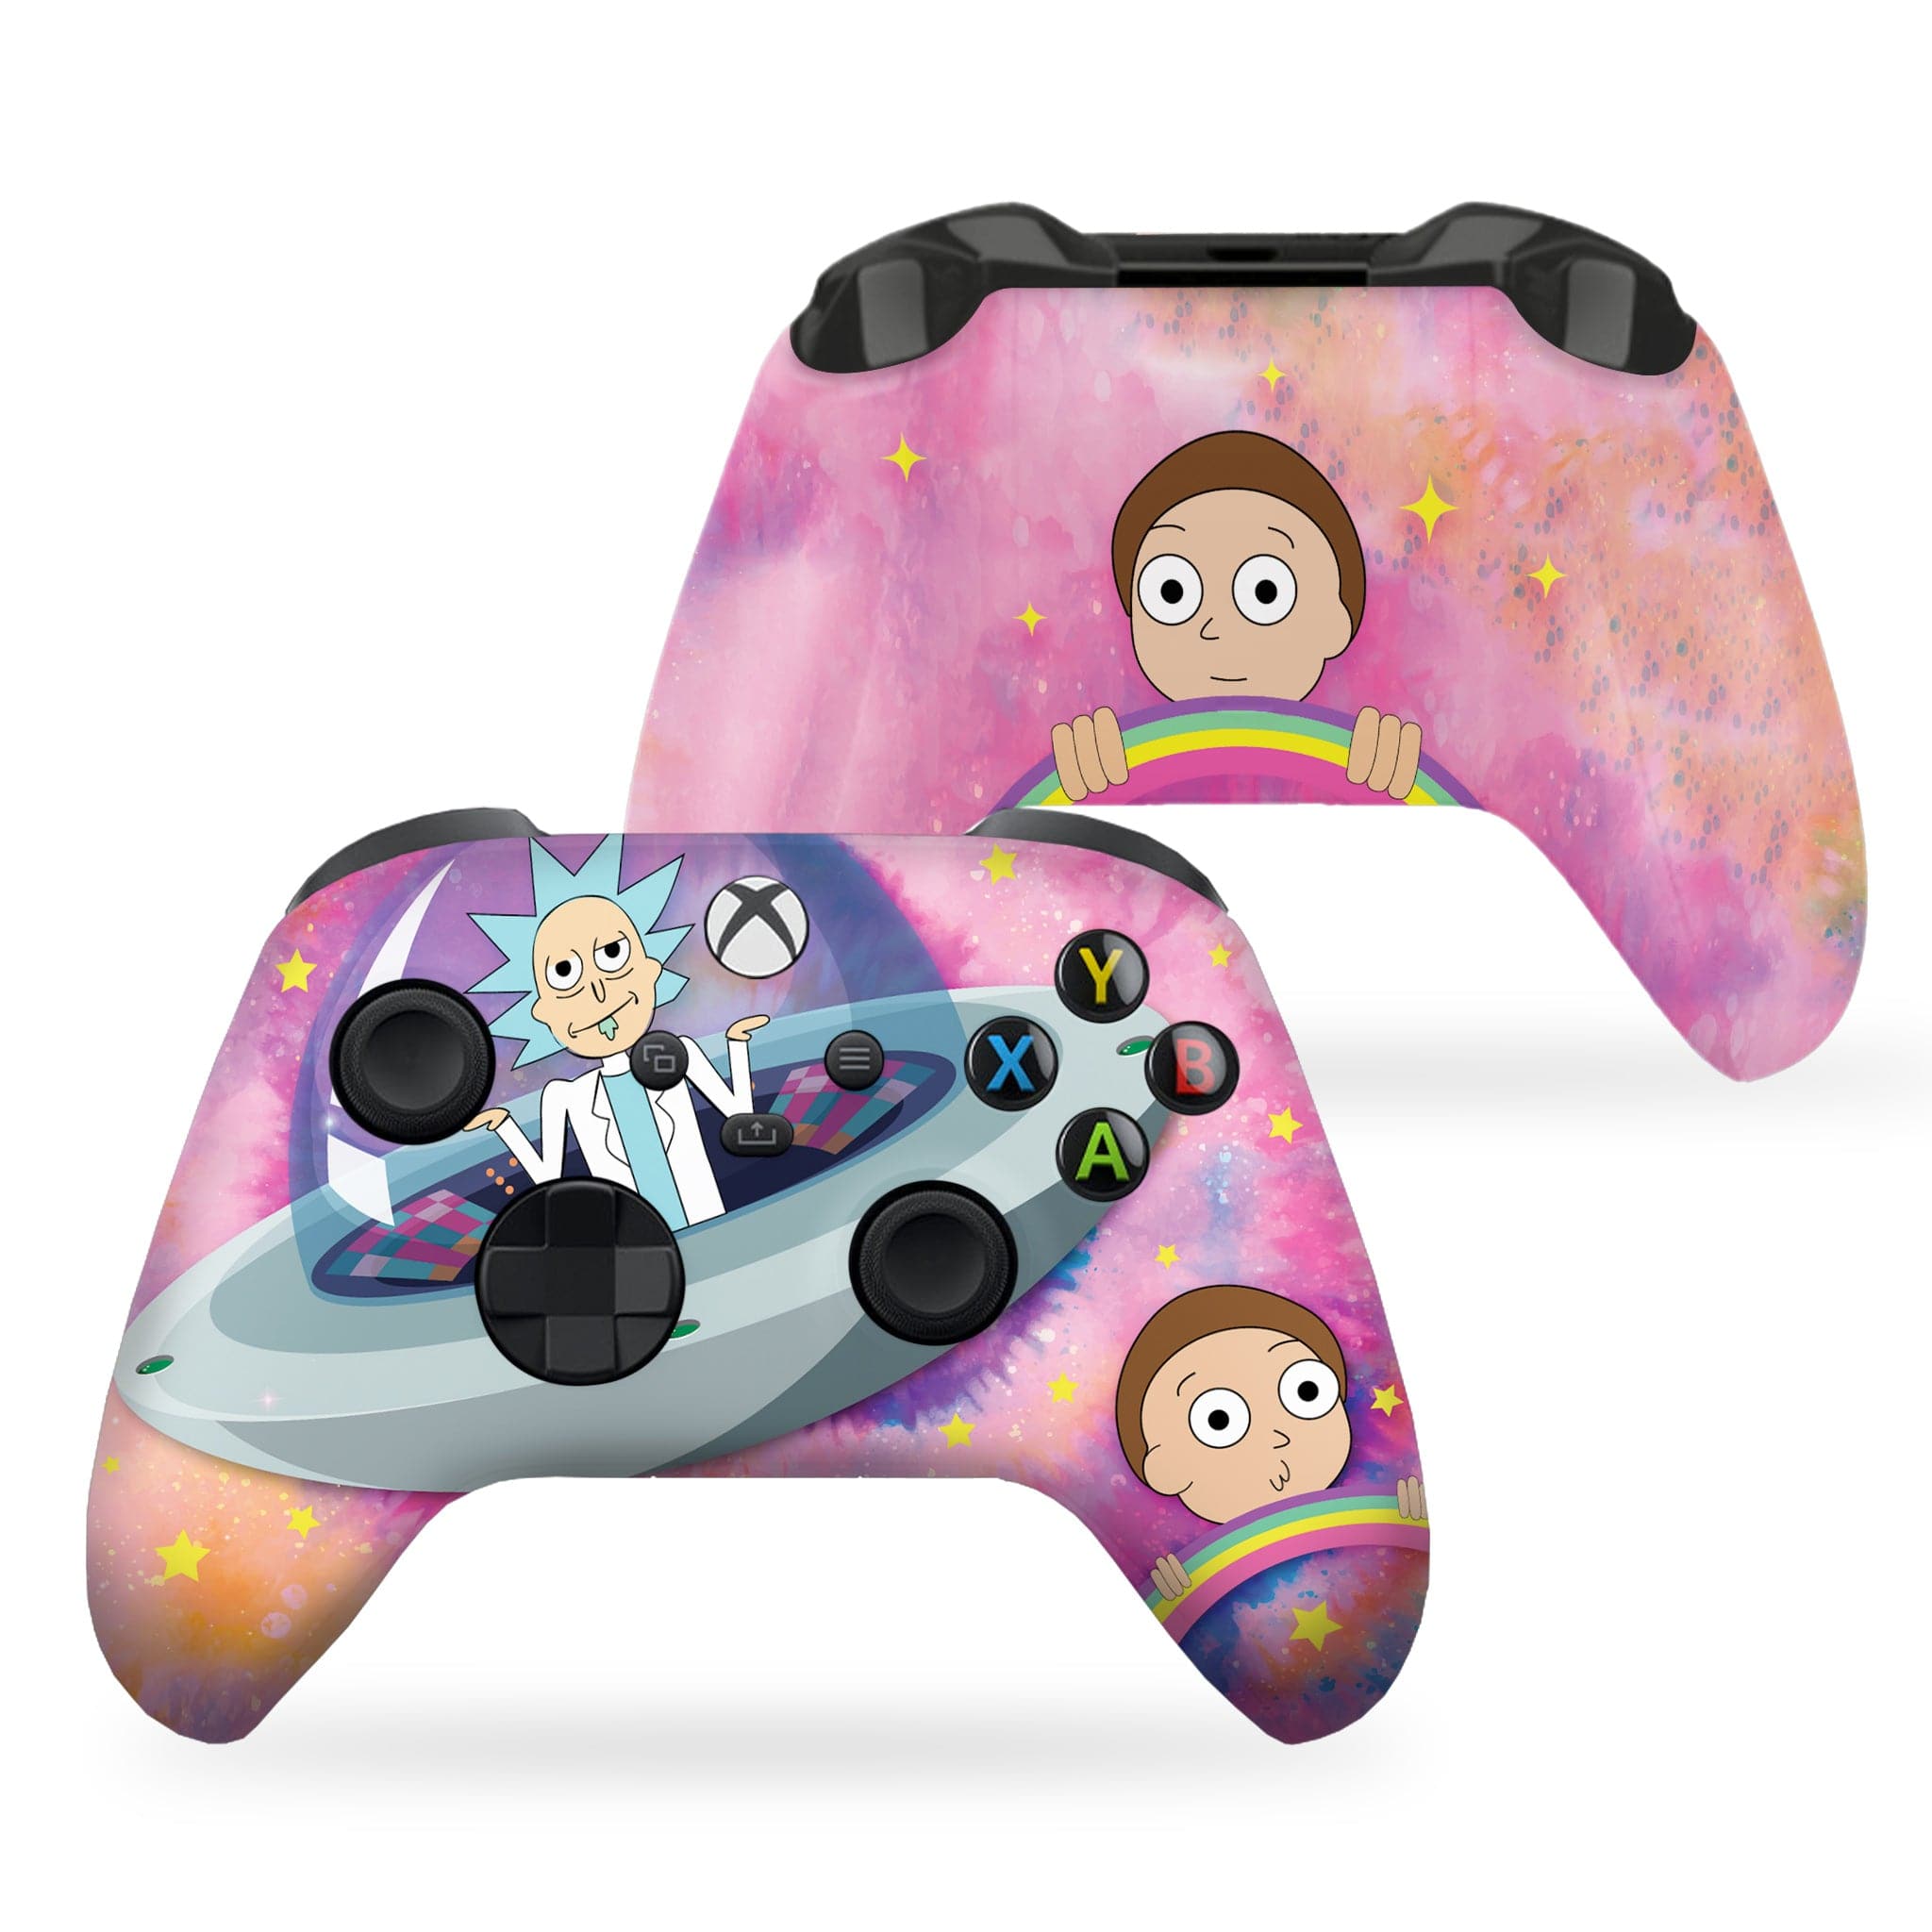 You can watch Rick and Morty on the Xbox One browser! : r/xboxone